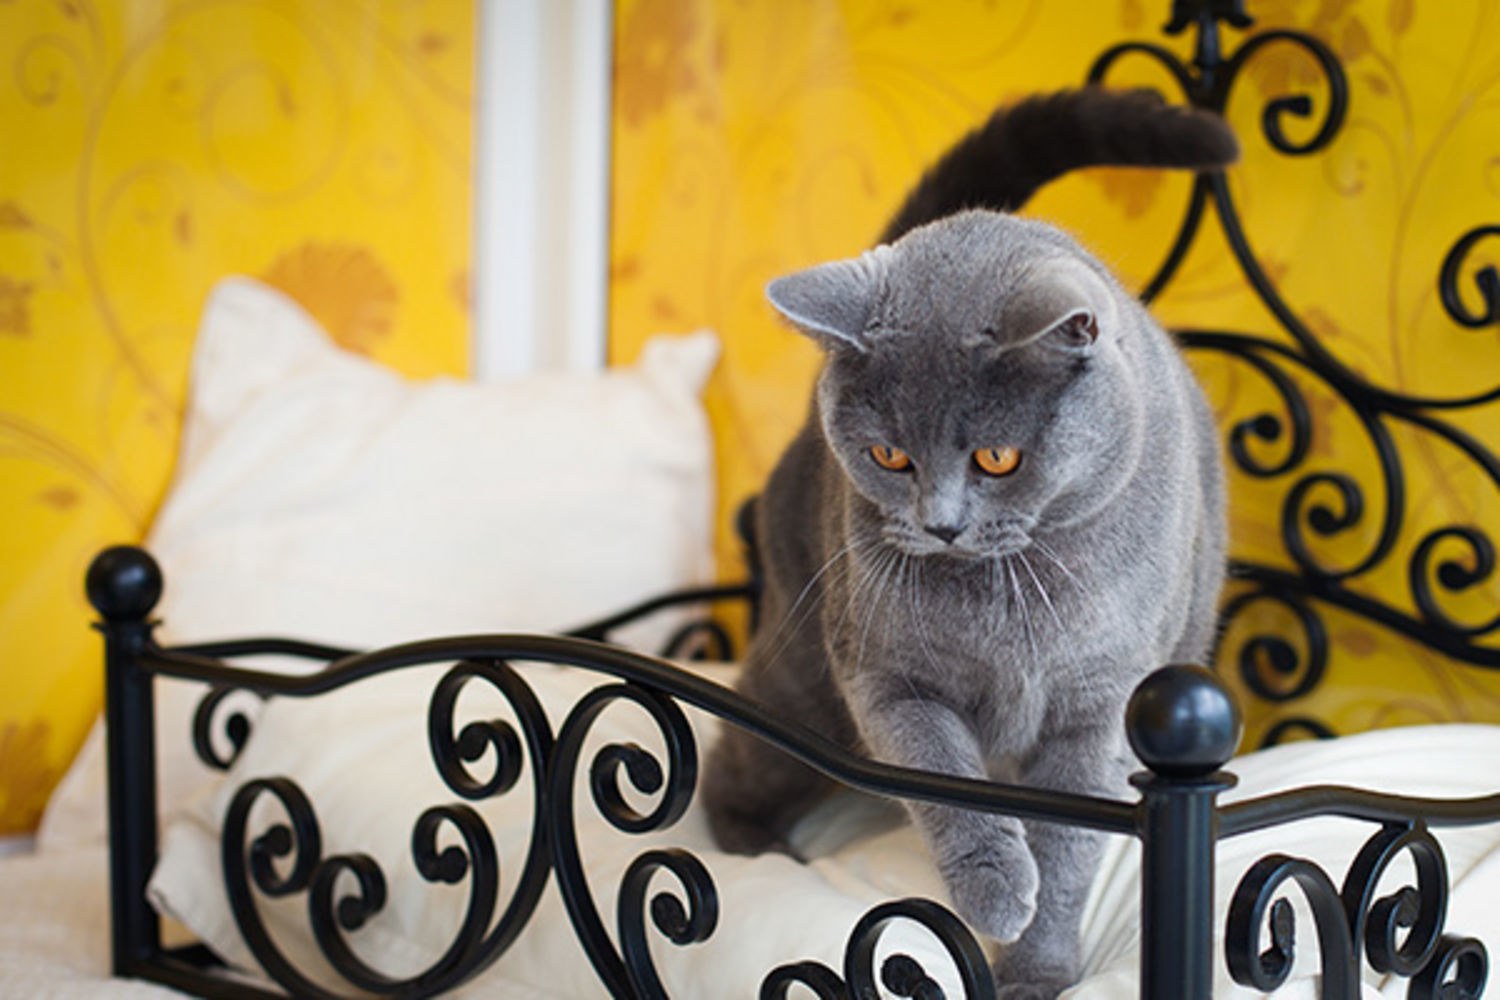 Southwest London’s now offers a boutique hotel for cats Luxurylaunches